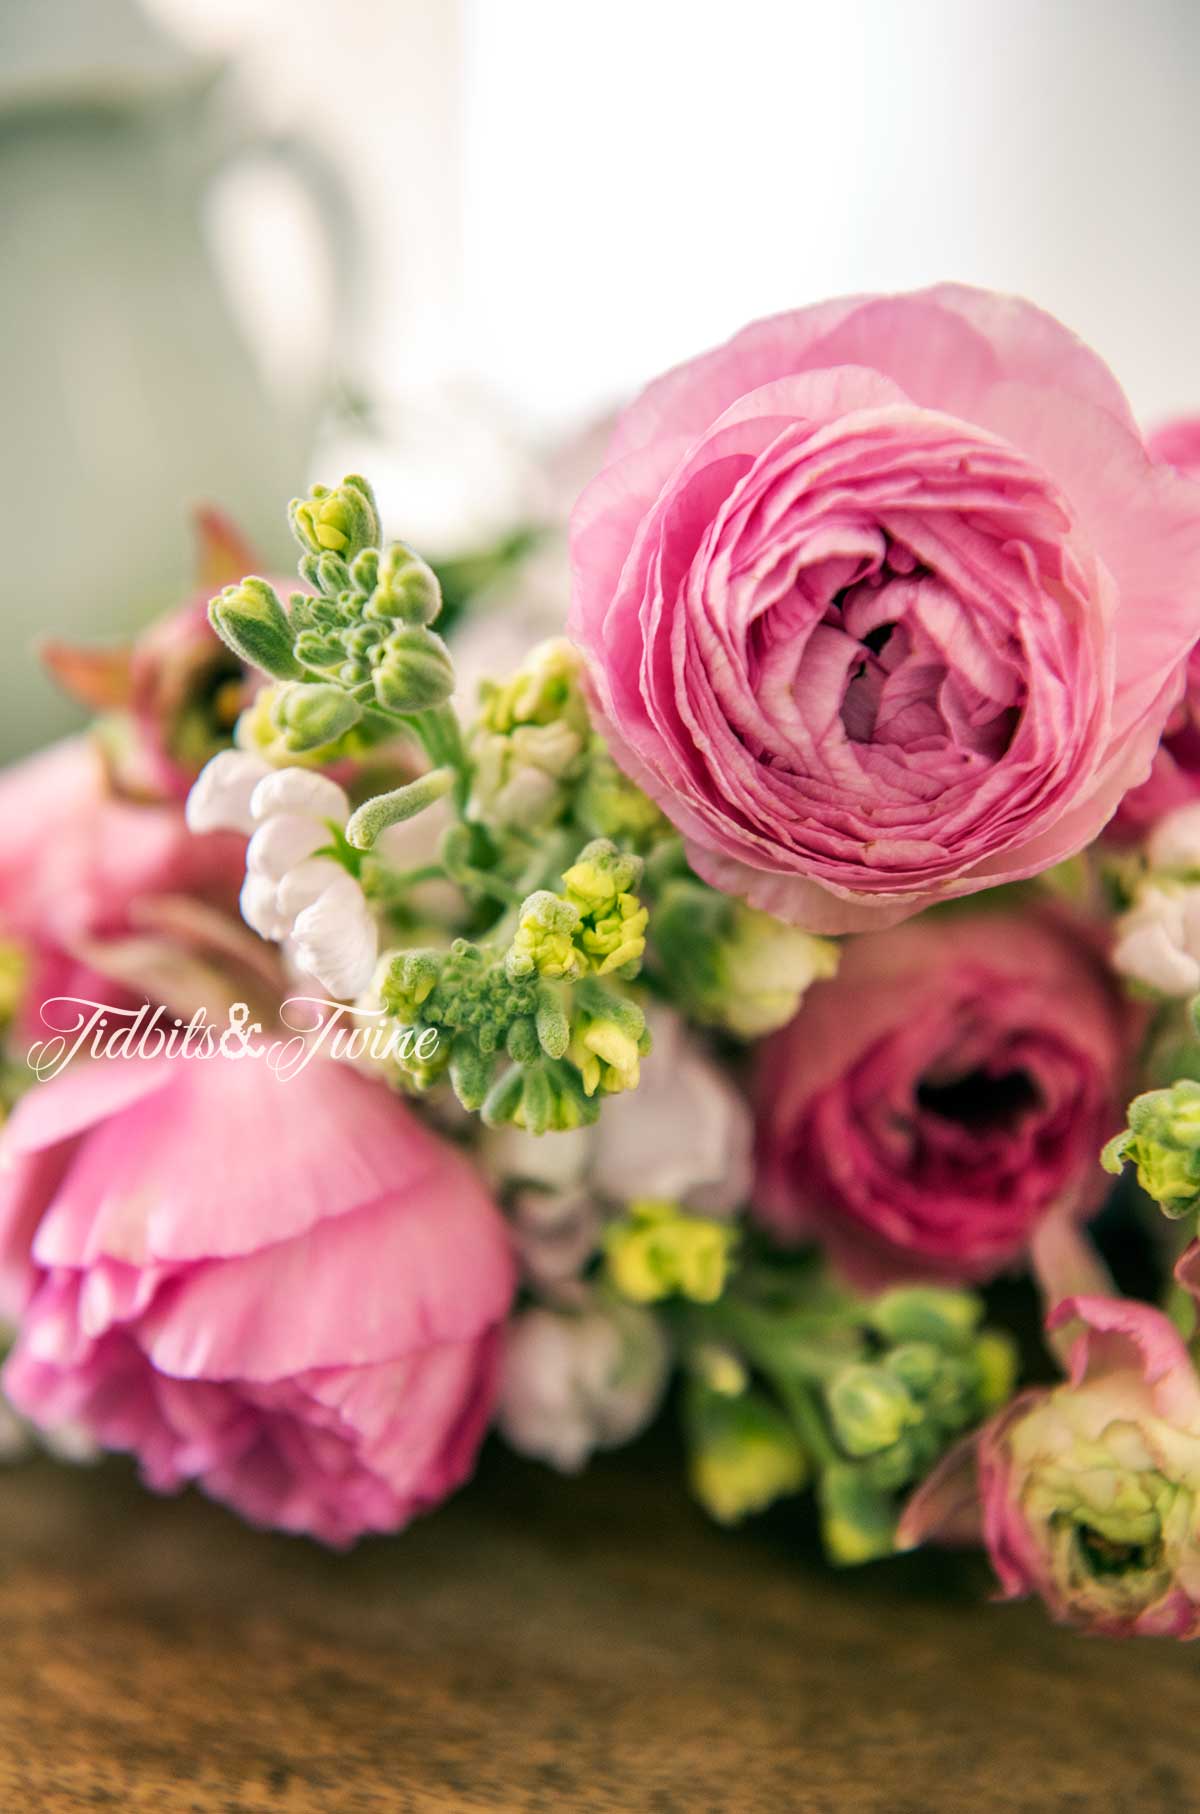 pink peonies mixed with white snap dragons lying on wood table